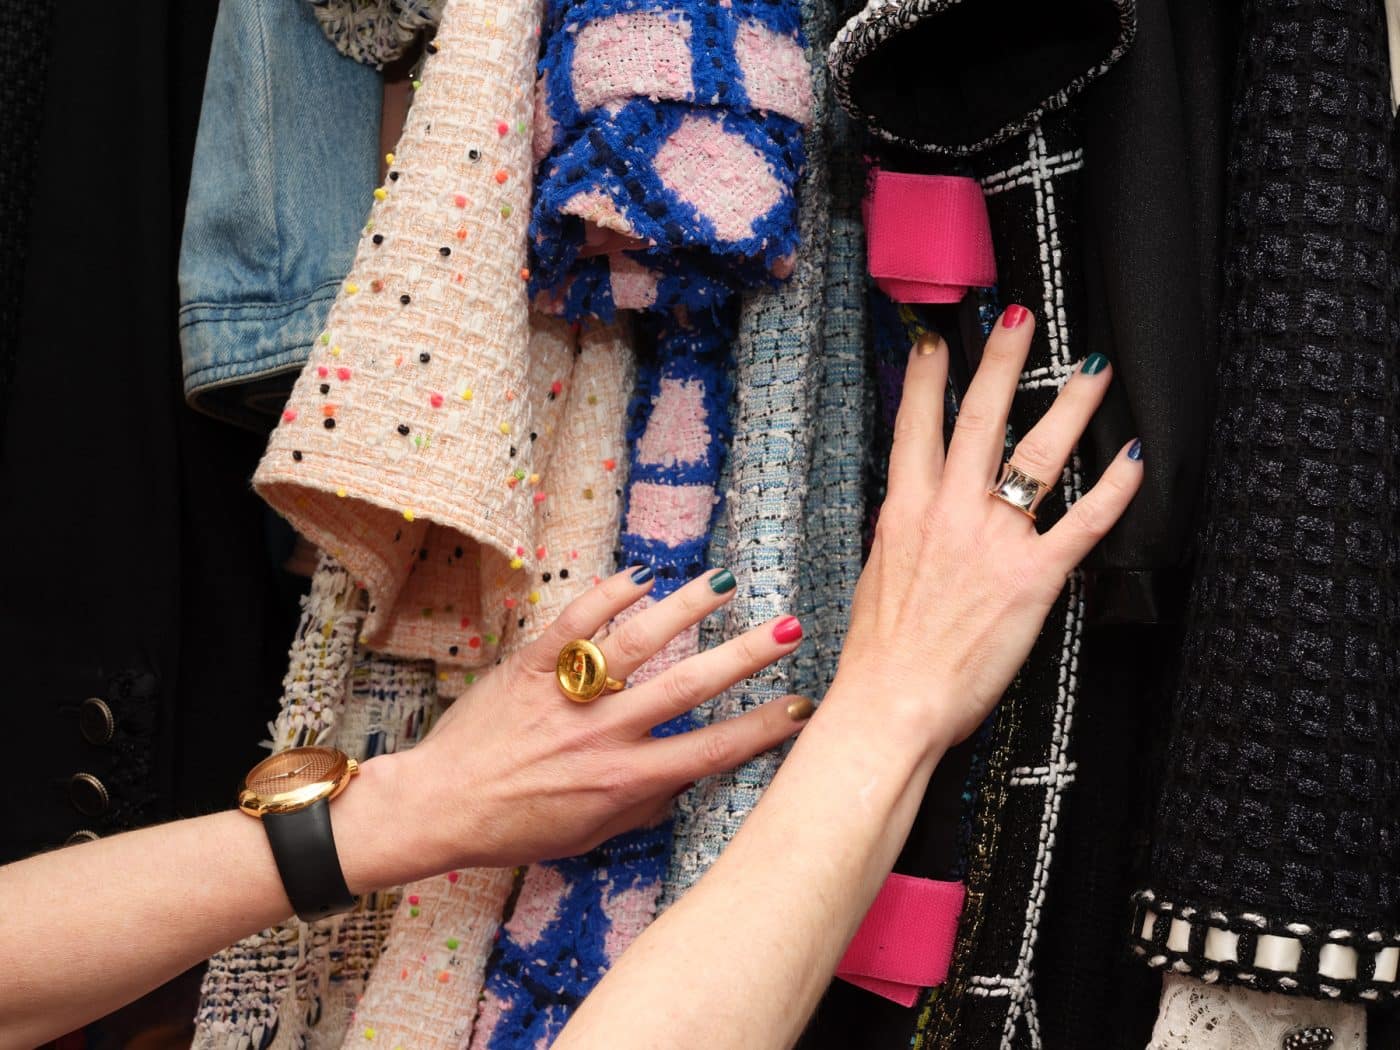 A Chanel Obsessive's Cache Extends Well beyond Her Walk-In Closet